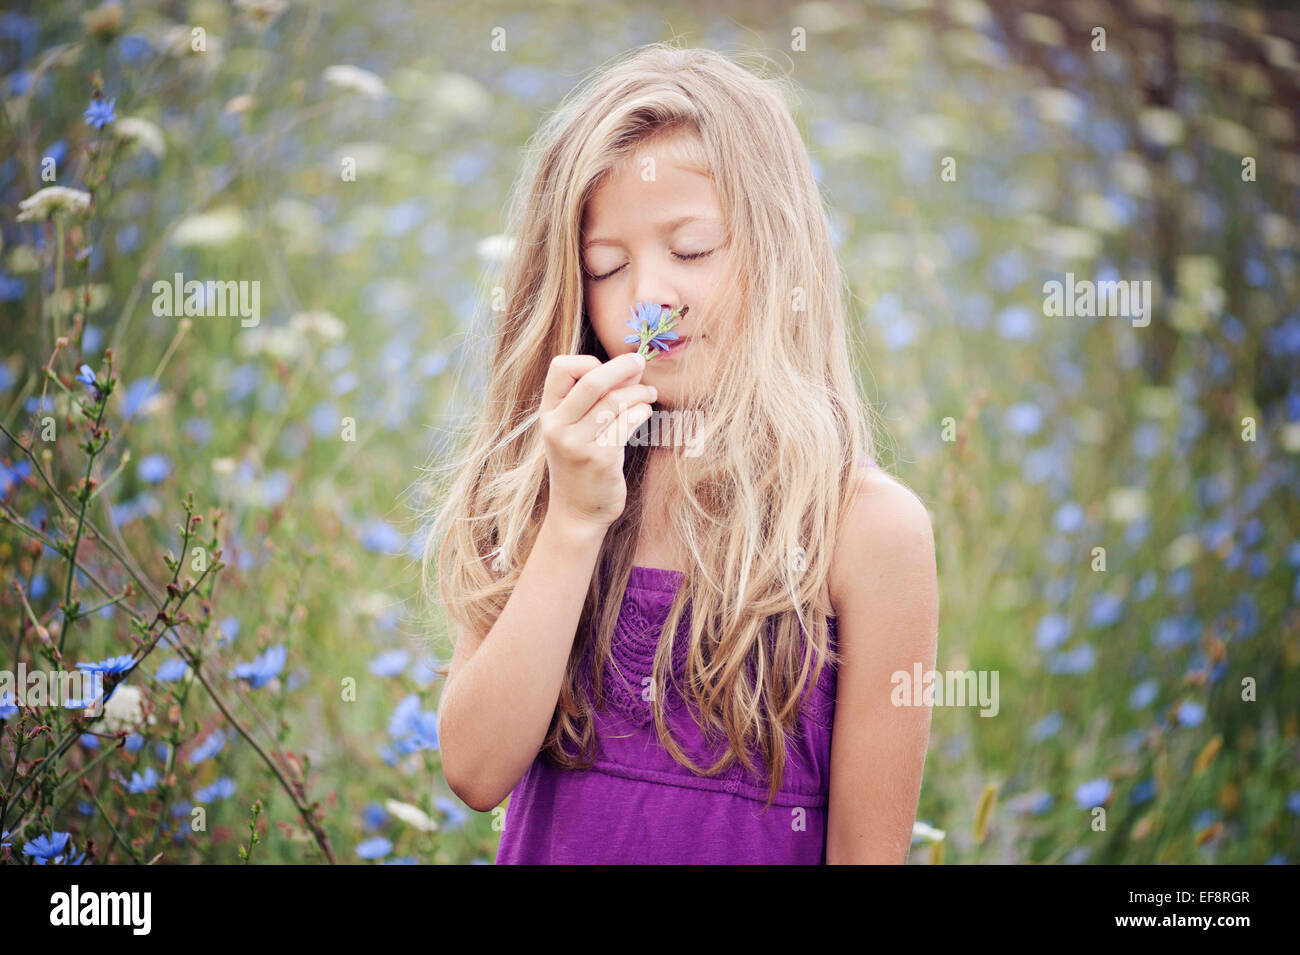 Portrait of young girl smelling flower (6-7) in chicory field Stock Photo